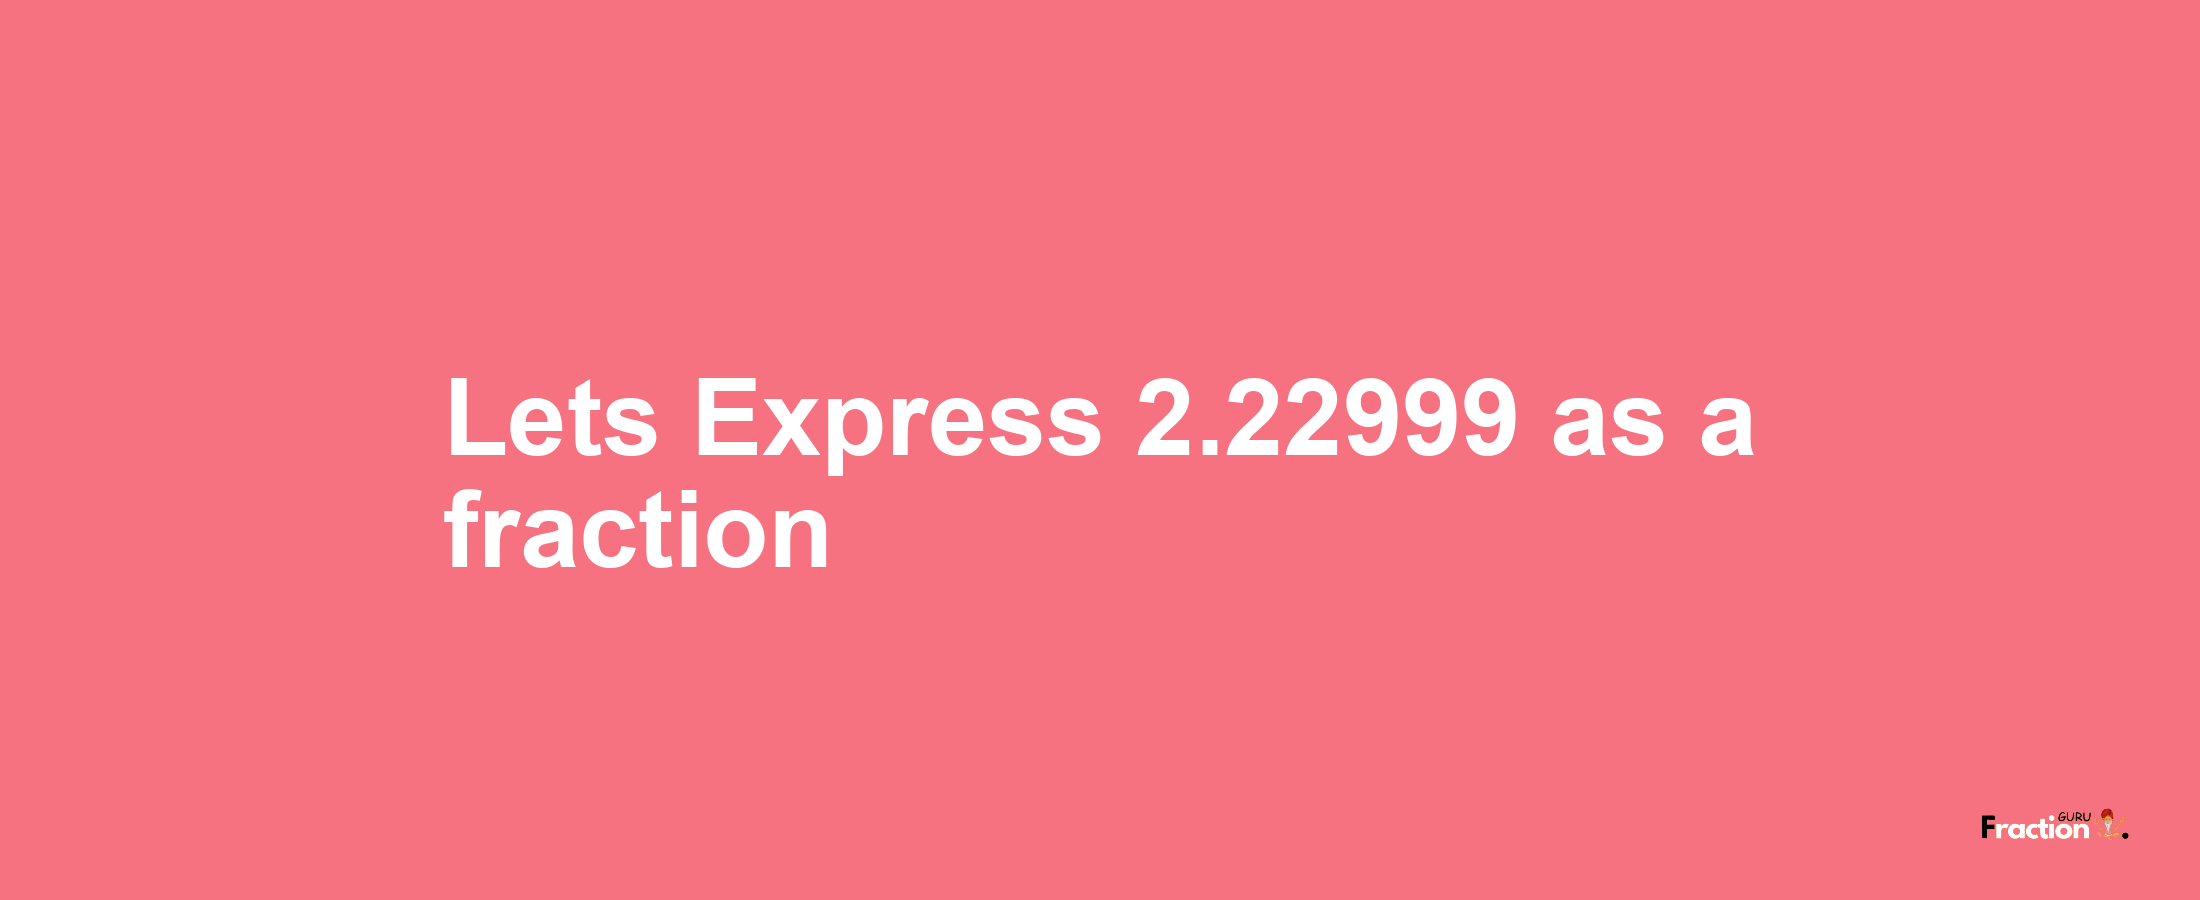 Lets Express 2.22999 as afraction